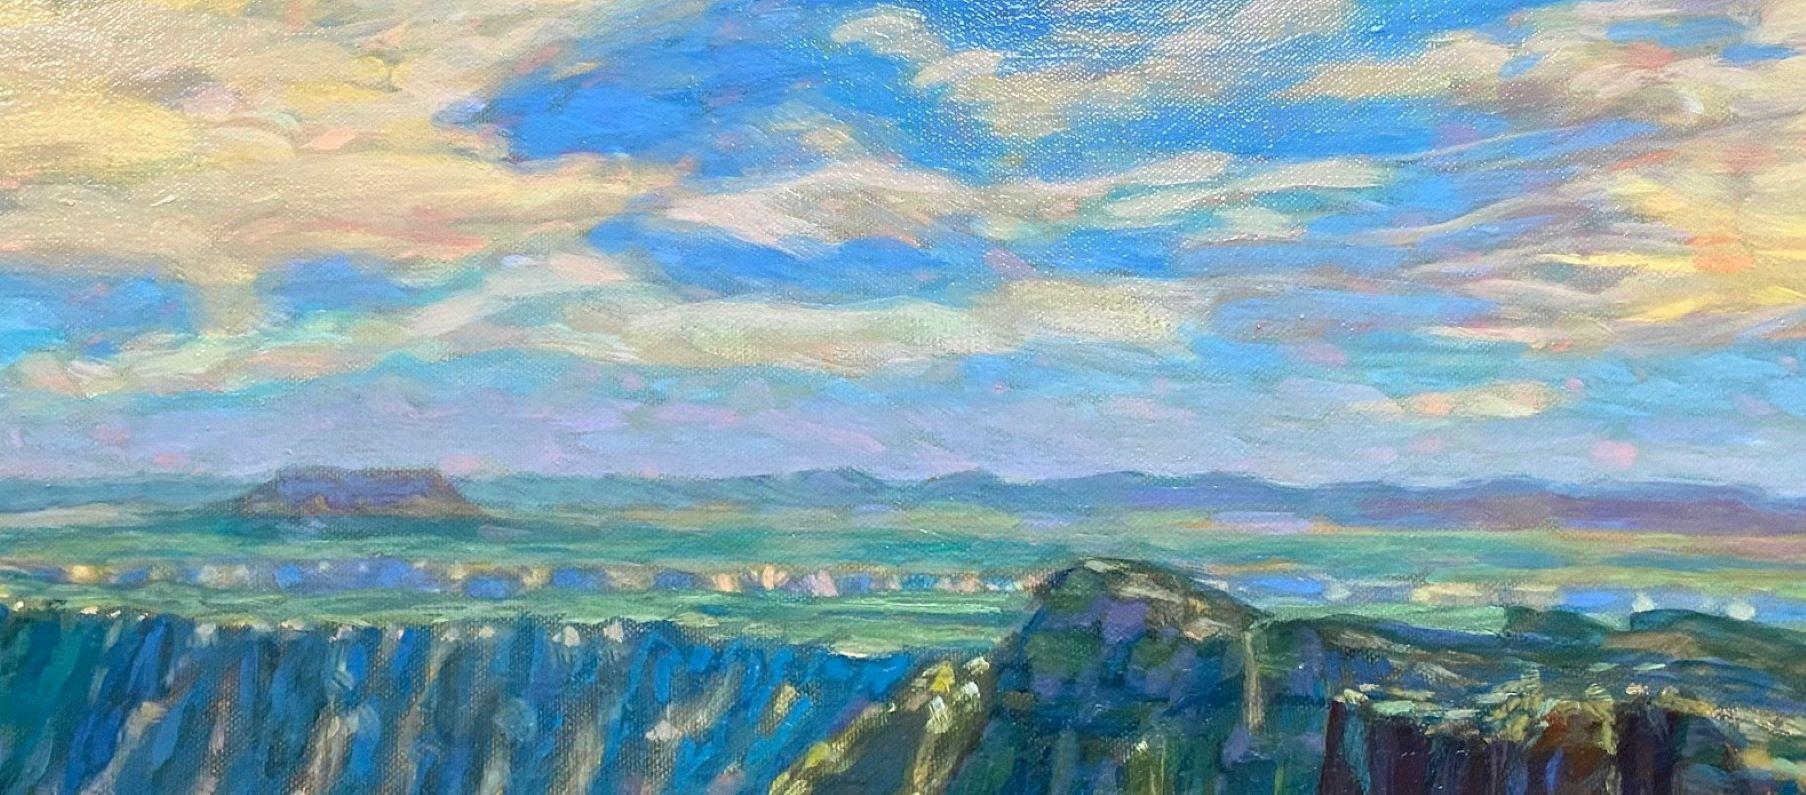 East of Eden, the Grand Canyon, original 30x40 expressionist landscape For Sale 1